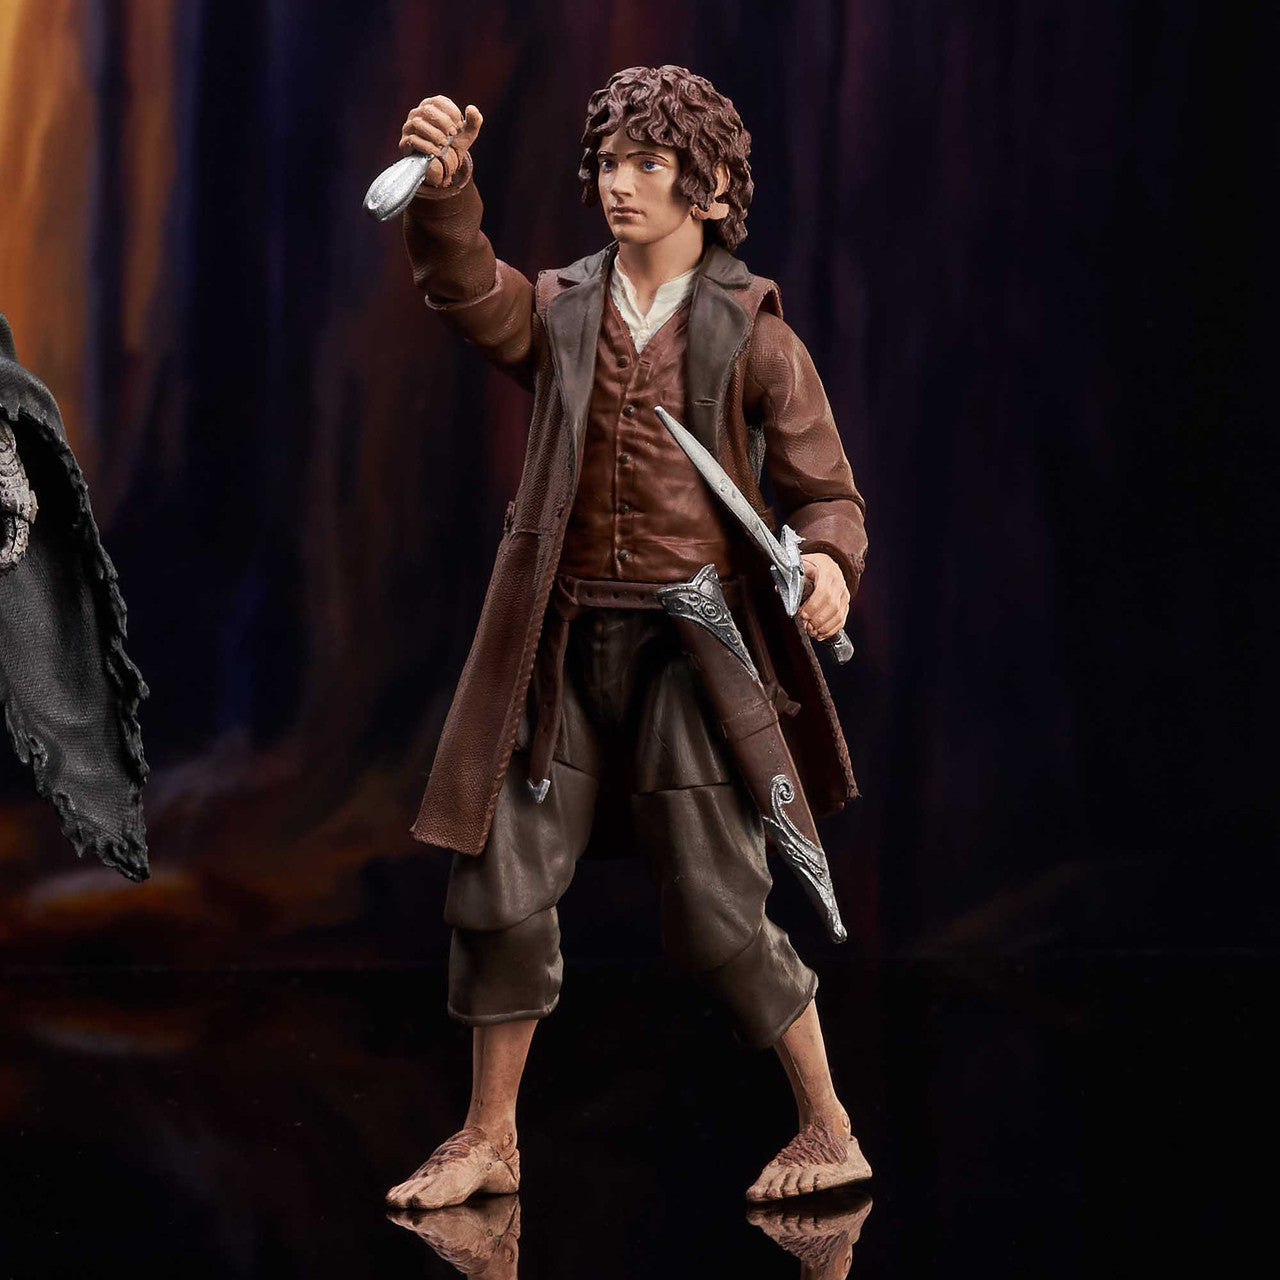 Frodo Baggins (Lord of the Rings: The Fellowship of the Ring) Series 2 Deluxe Action Figure